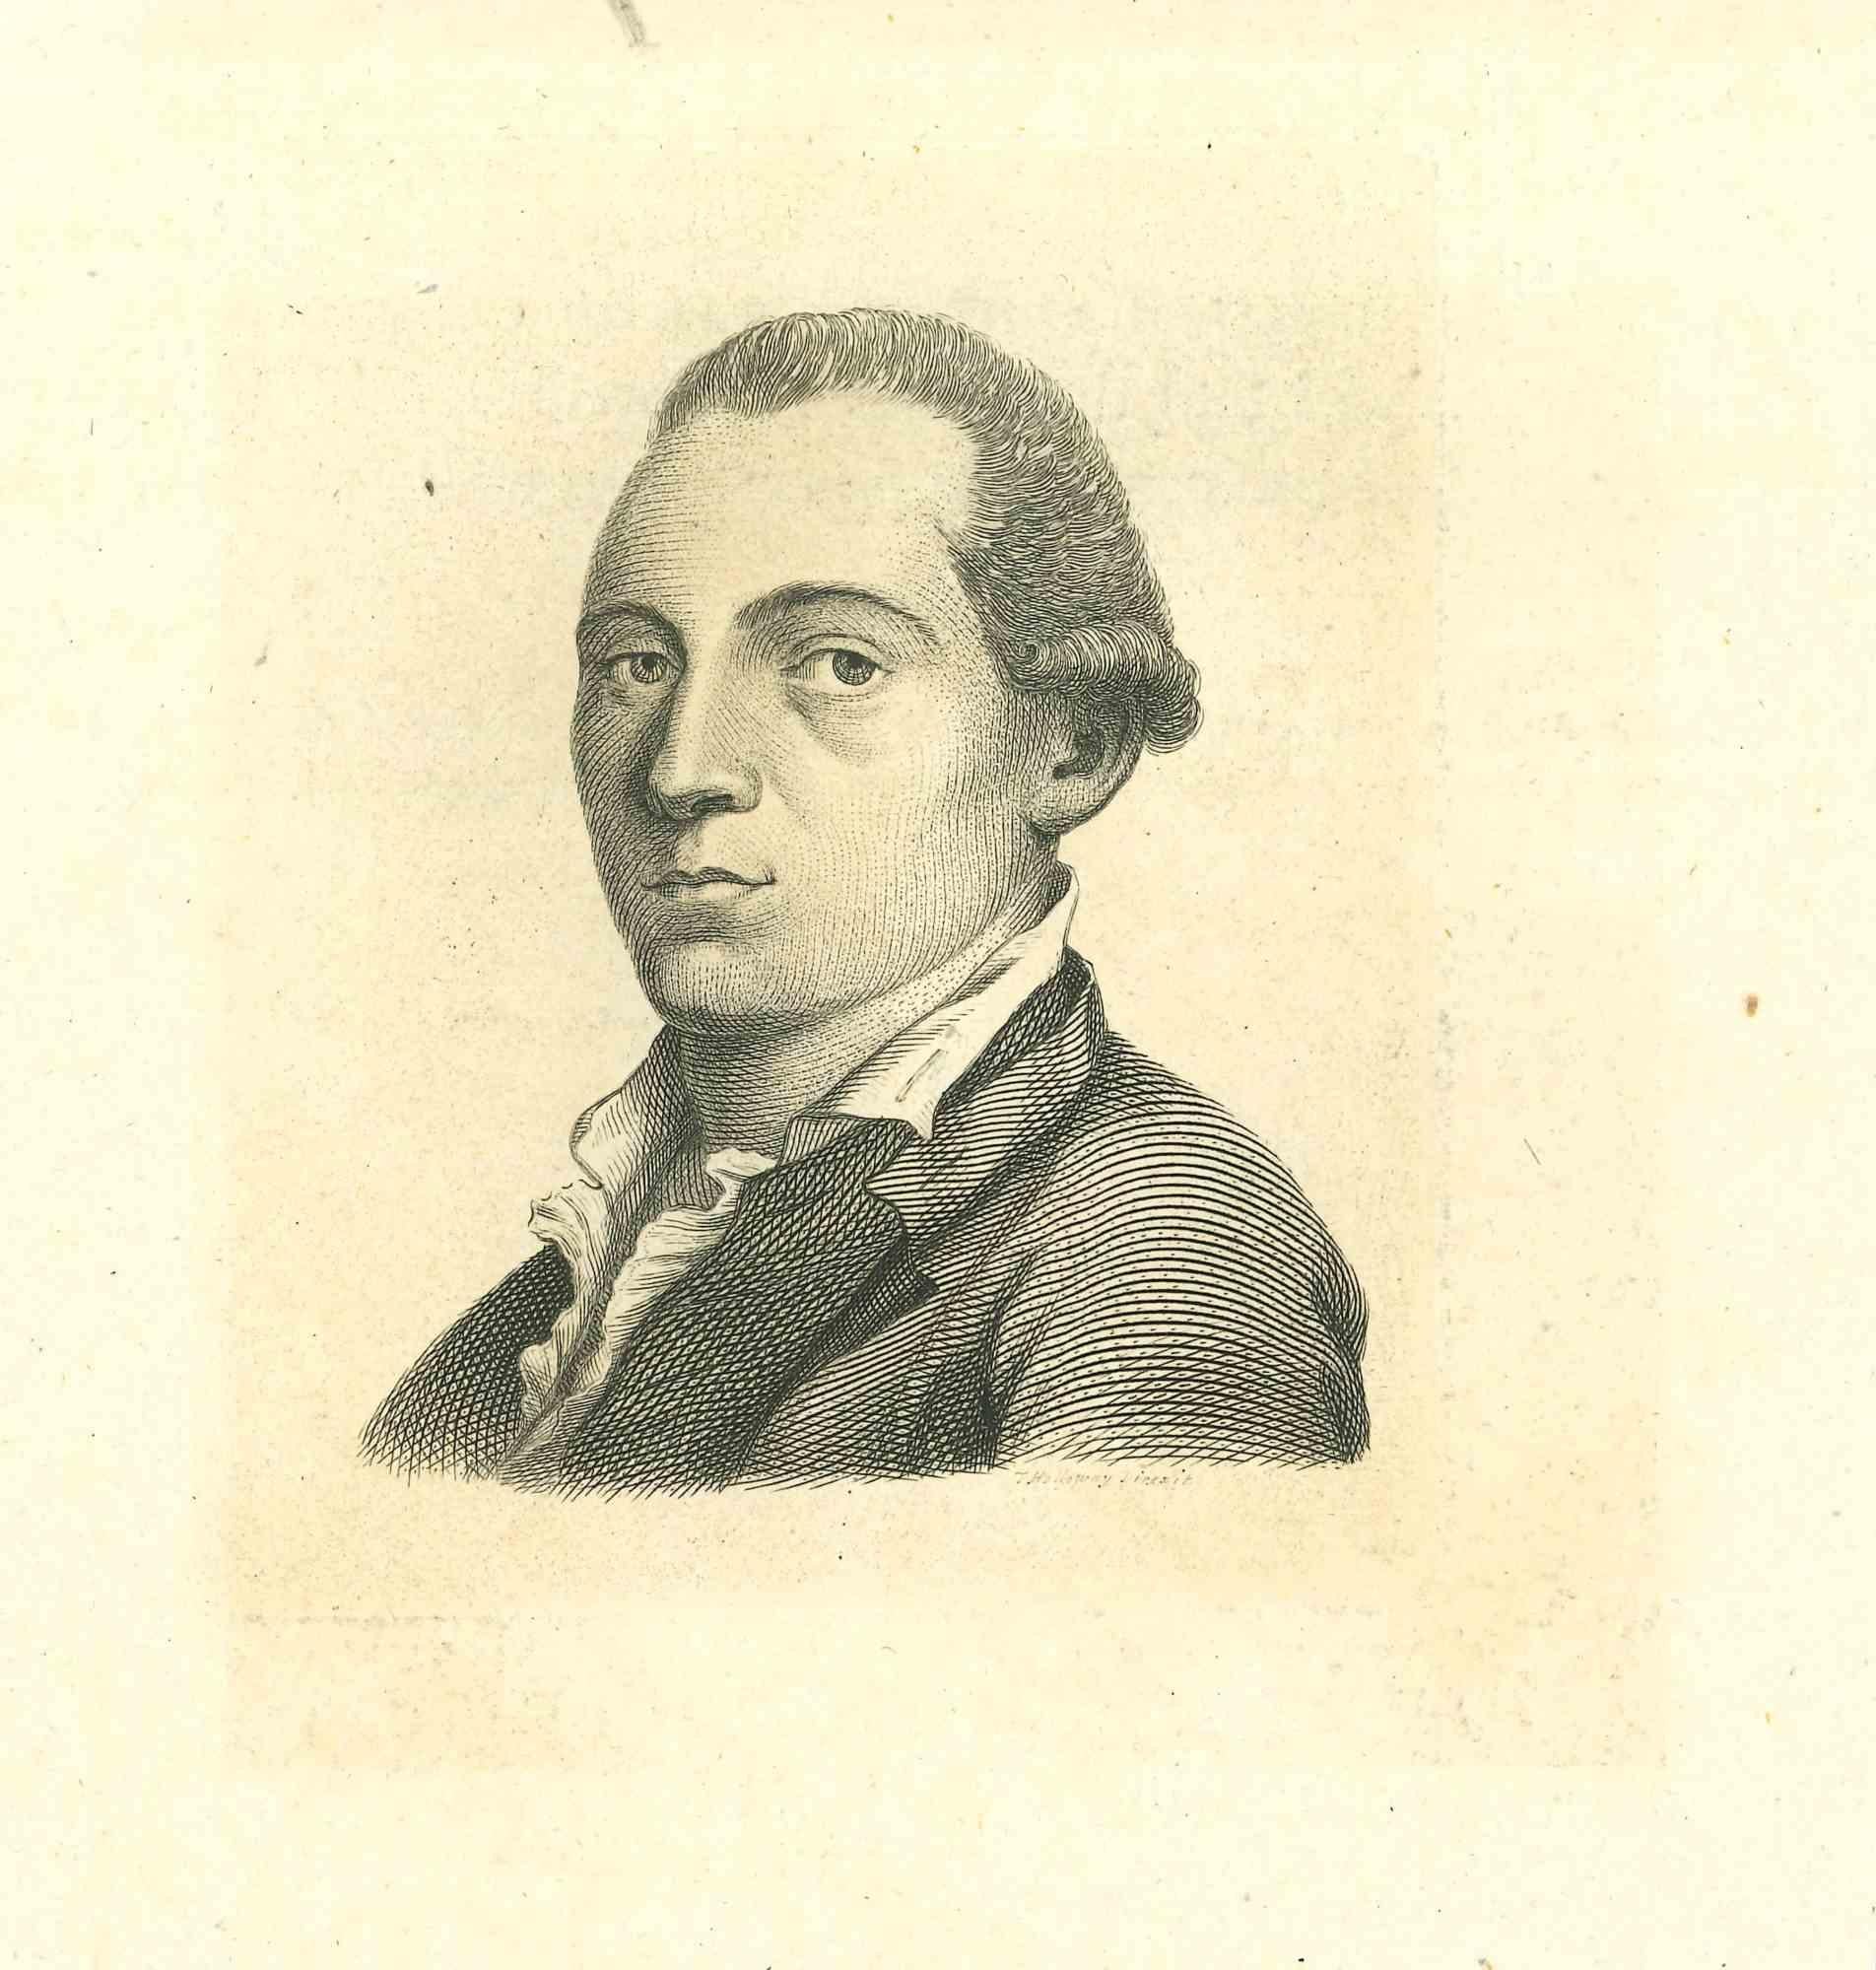 The Physiognomy - The Portrait is an original etching artwork realized by Thomas Holloway for Johann Caspar Lavater's "Essays on Physiognomy, Designed to Promote the Knowledge and the Love of Mankind", London, Bensley, 1810. 

Signed on the plate,